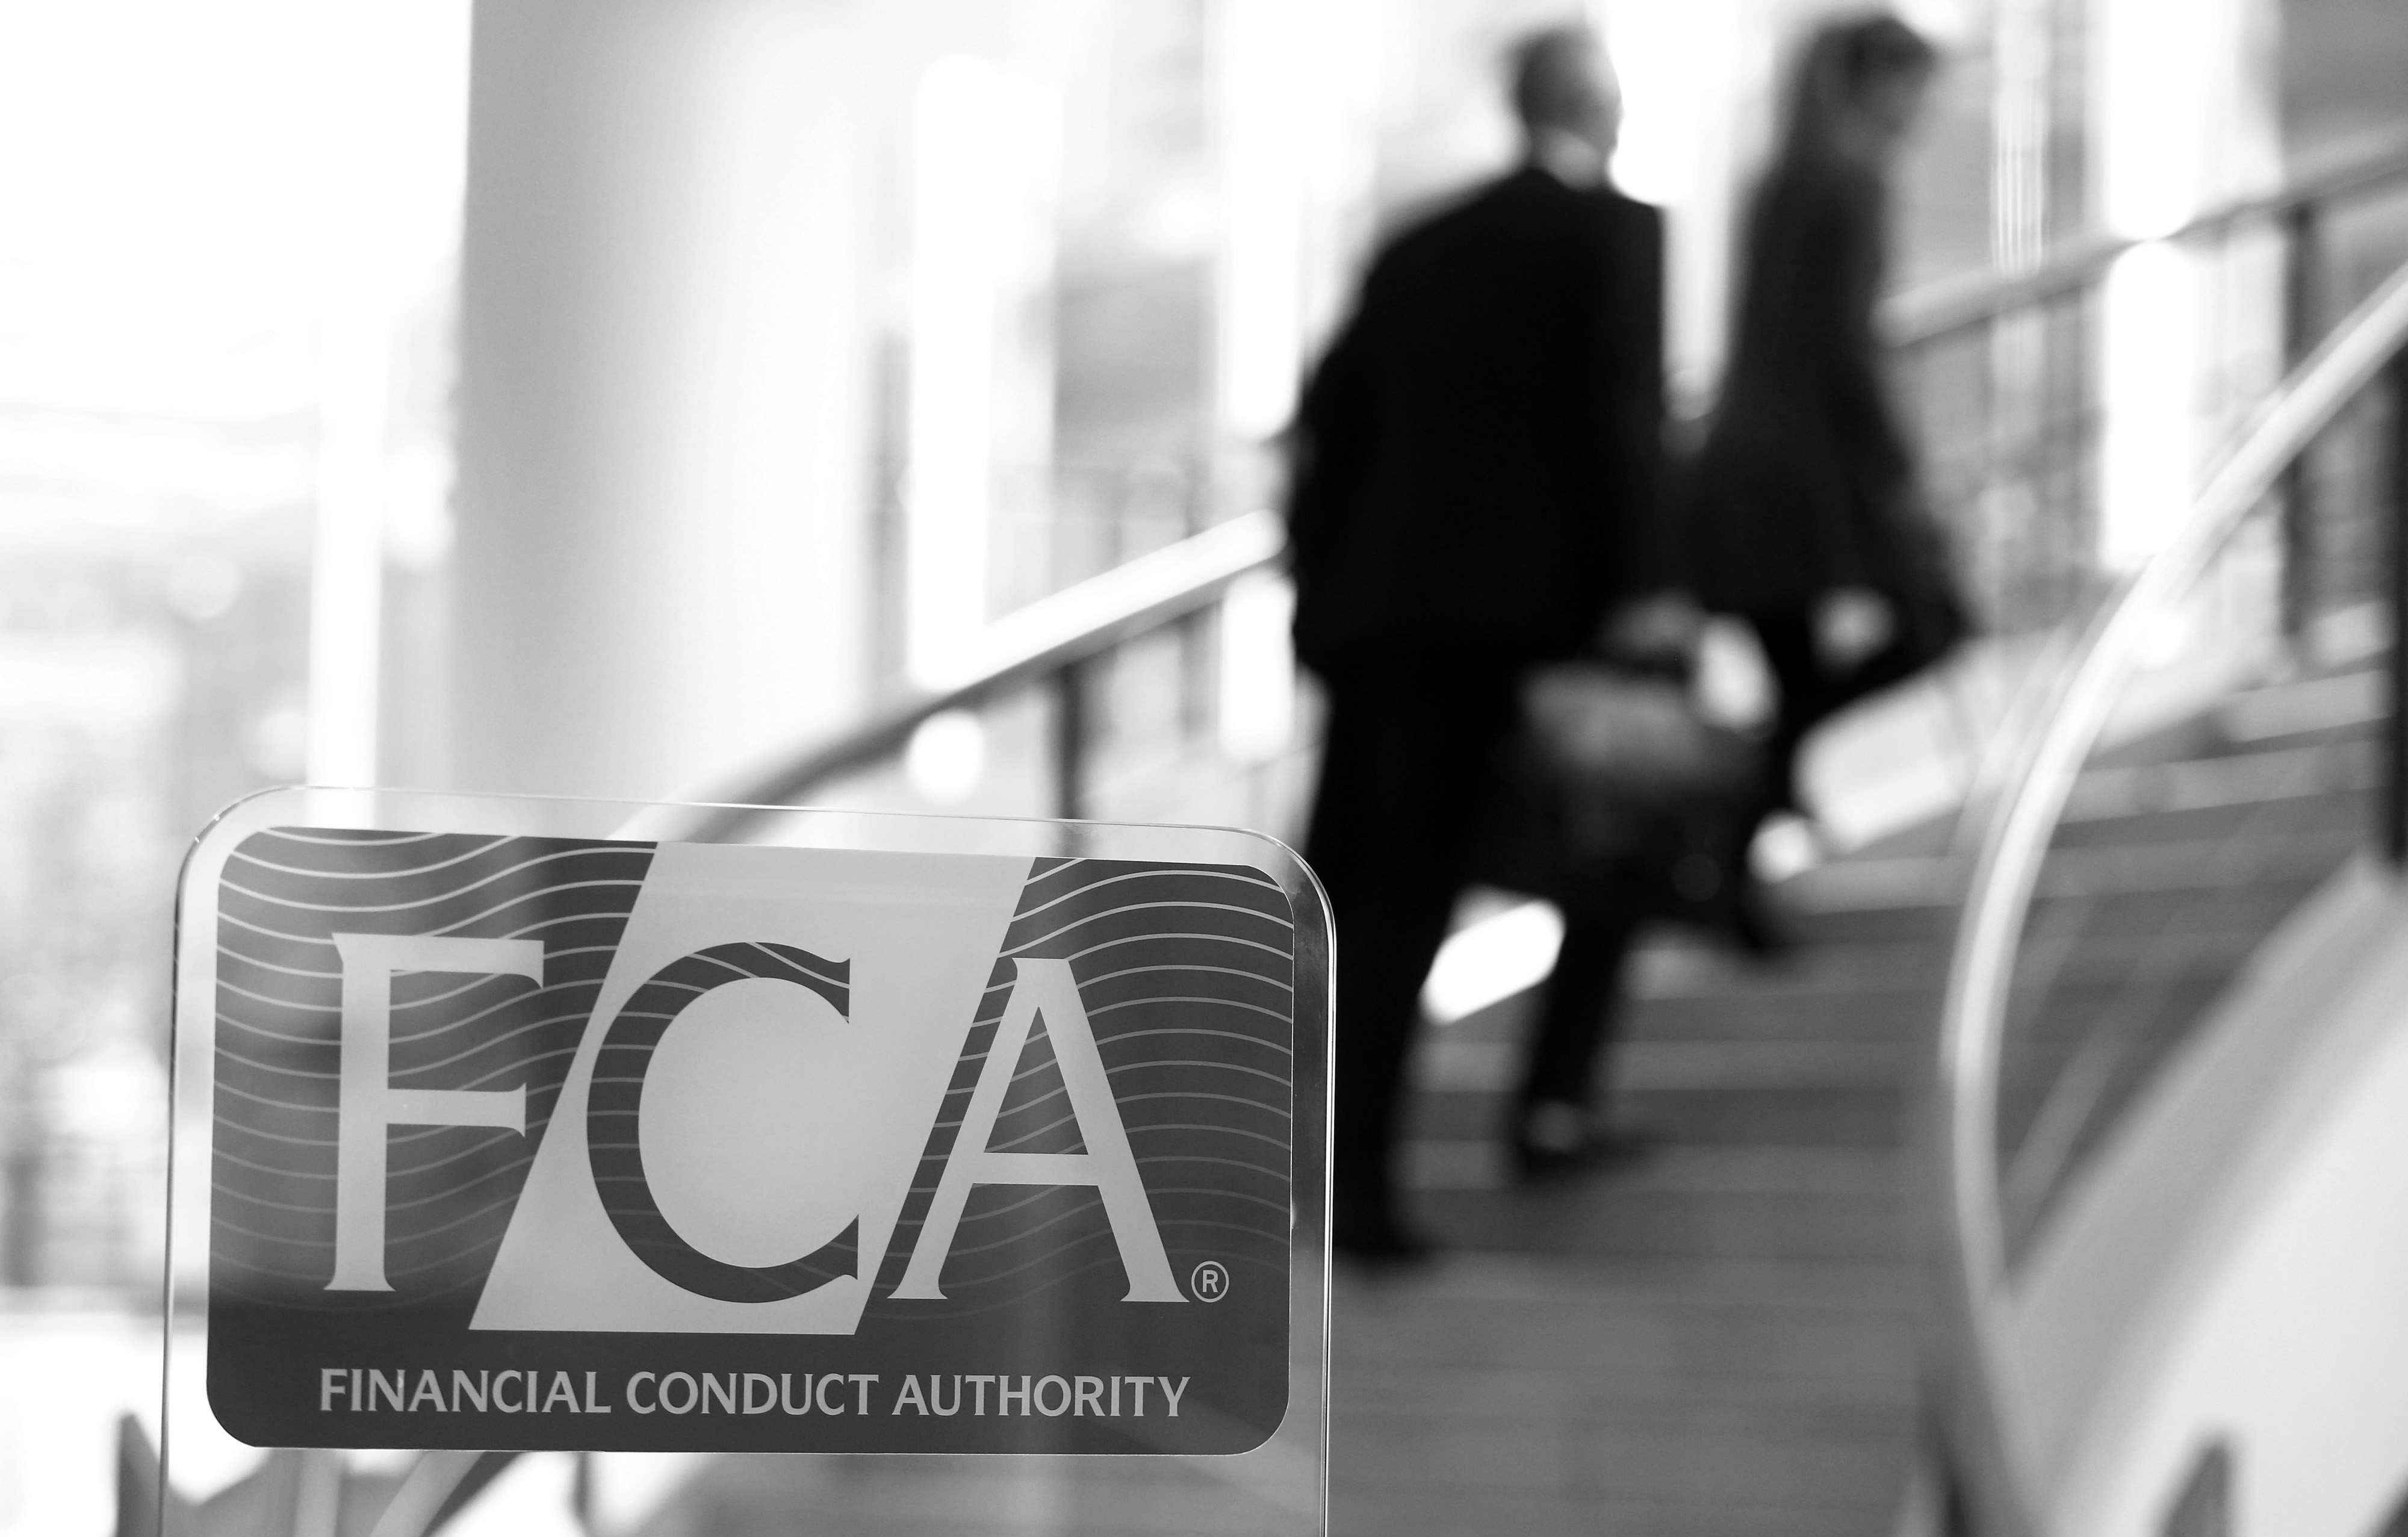 The headquarters of the Financial Conduct Authority in&nbsp;London.